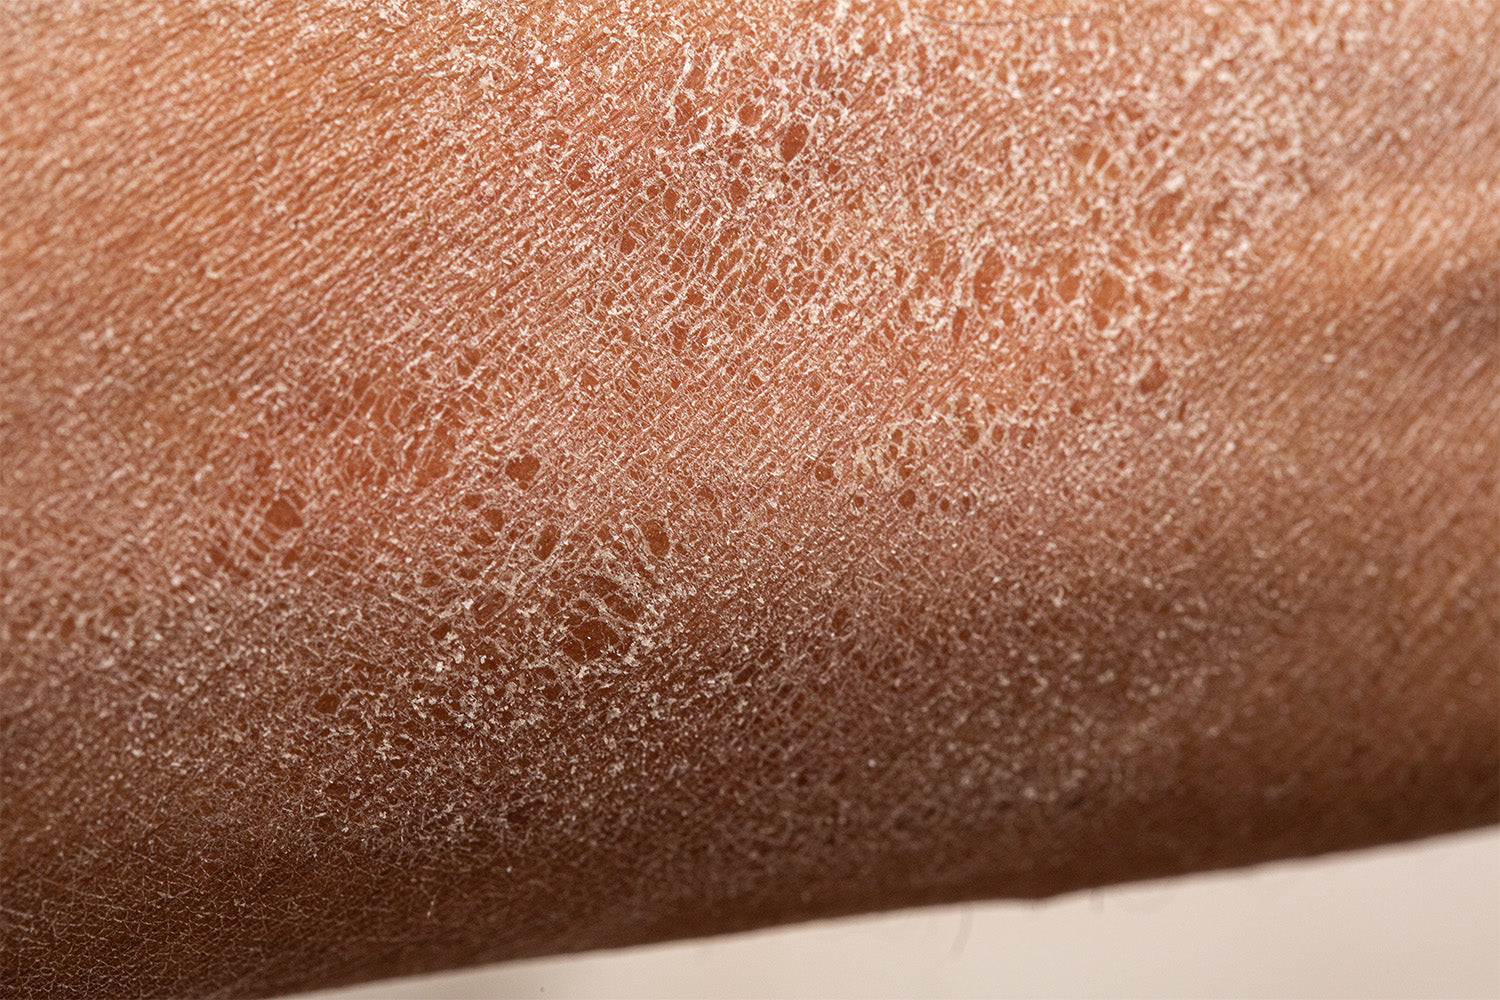 6 Causes of Dry Patches on Your & What To Do | iwi life